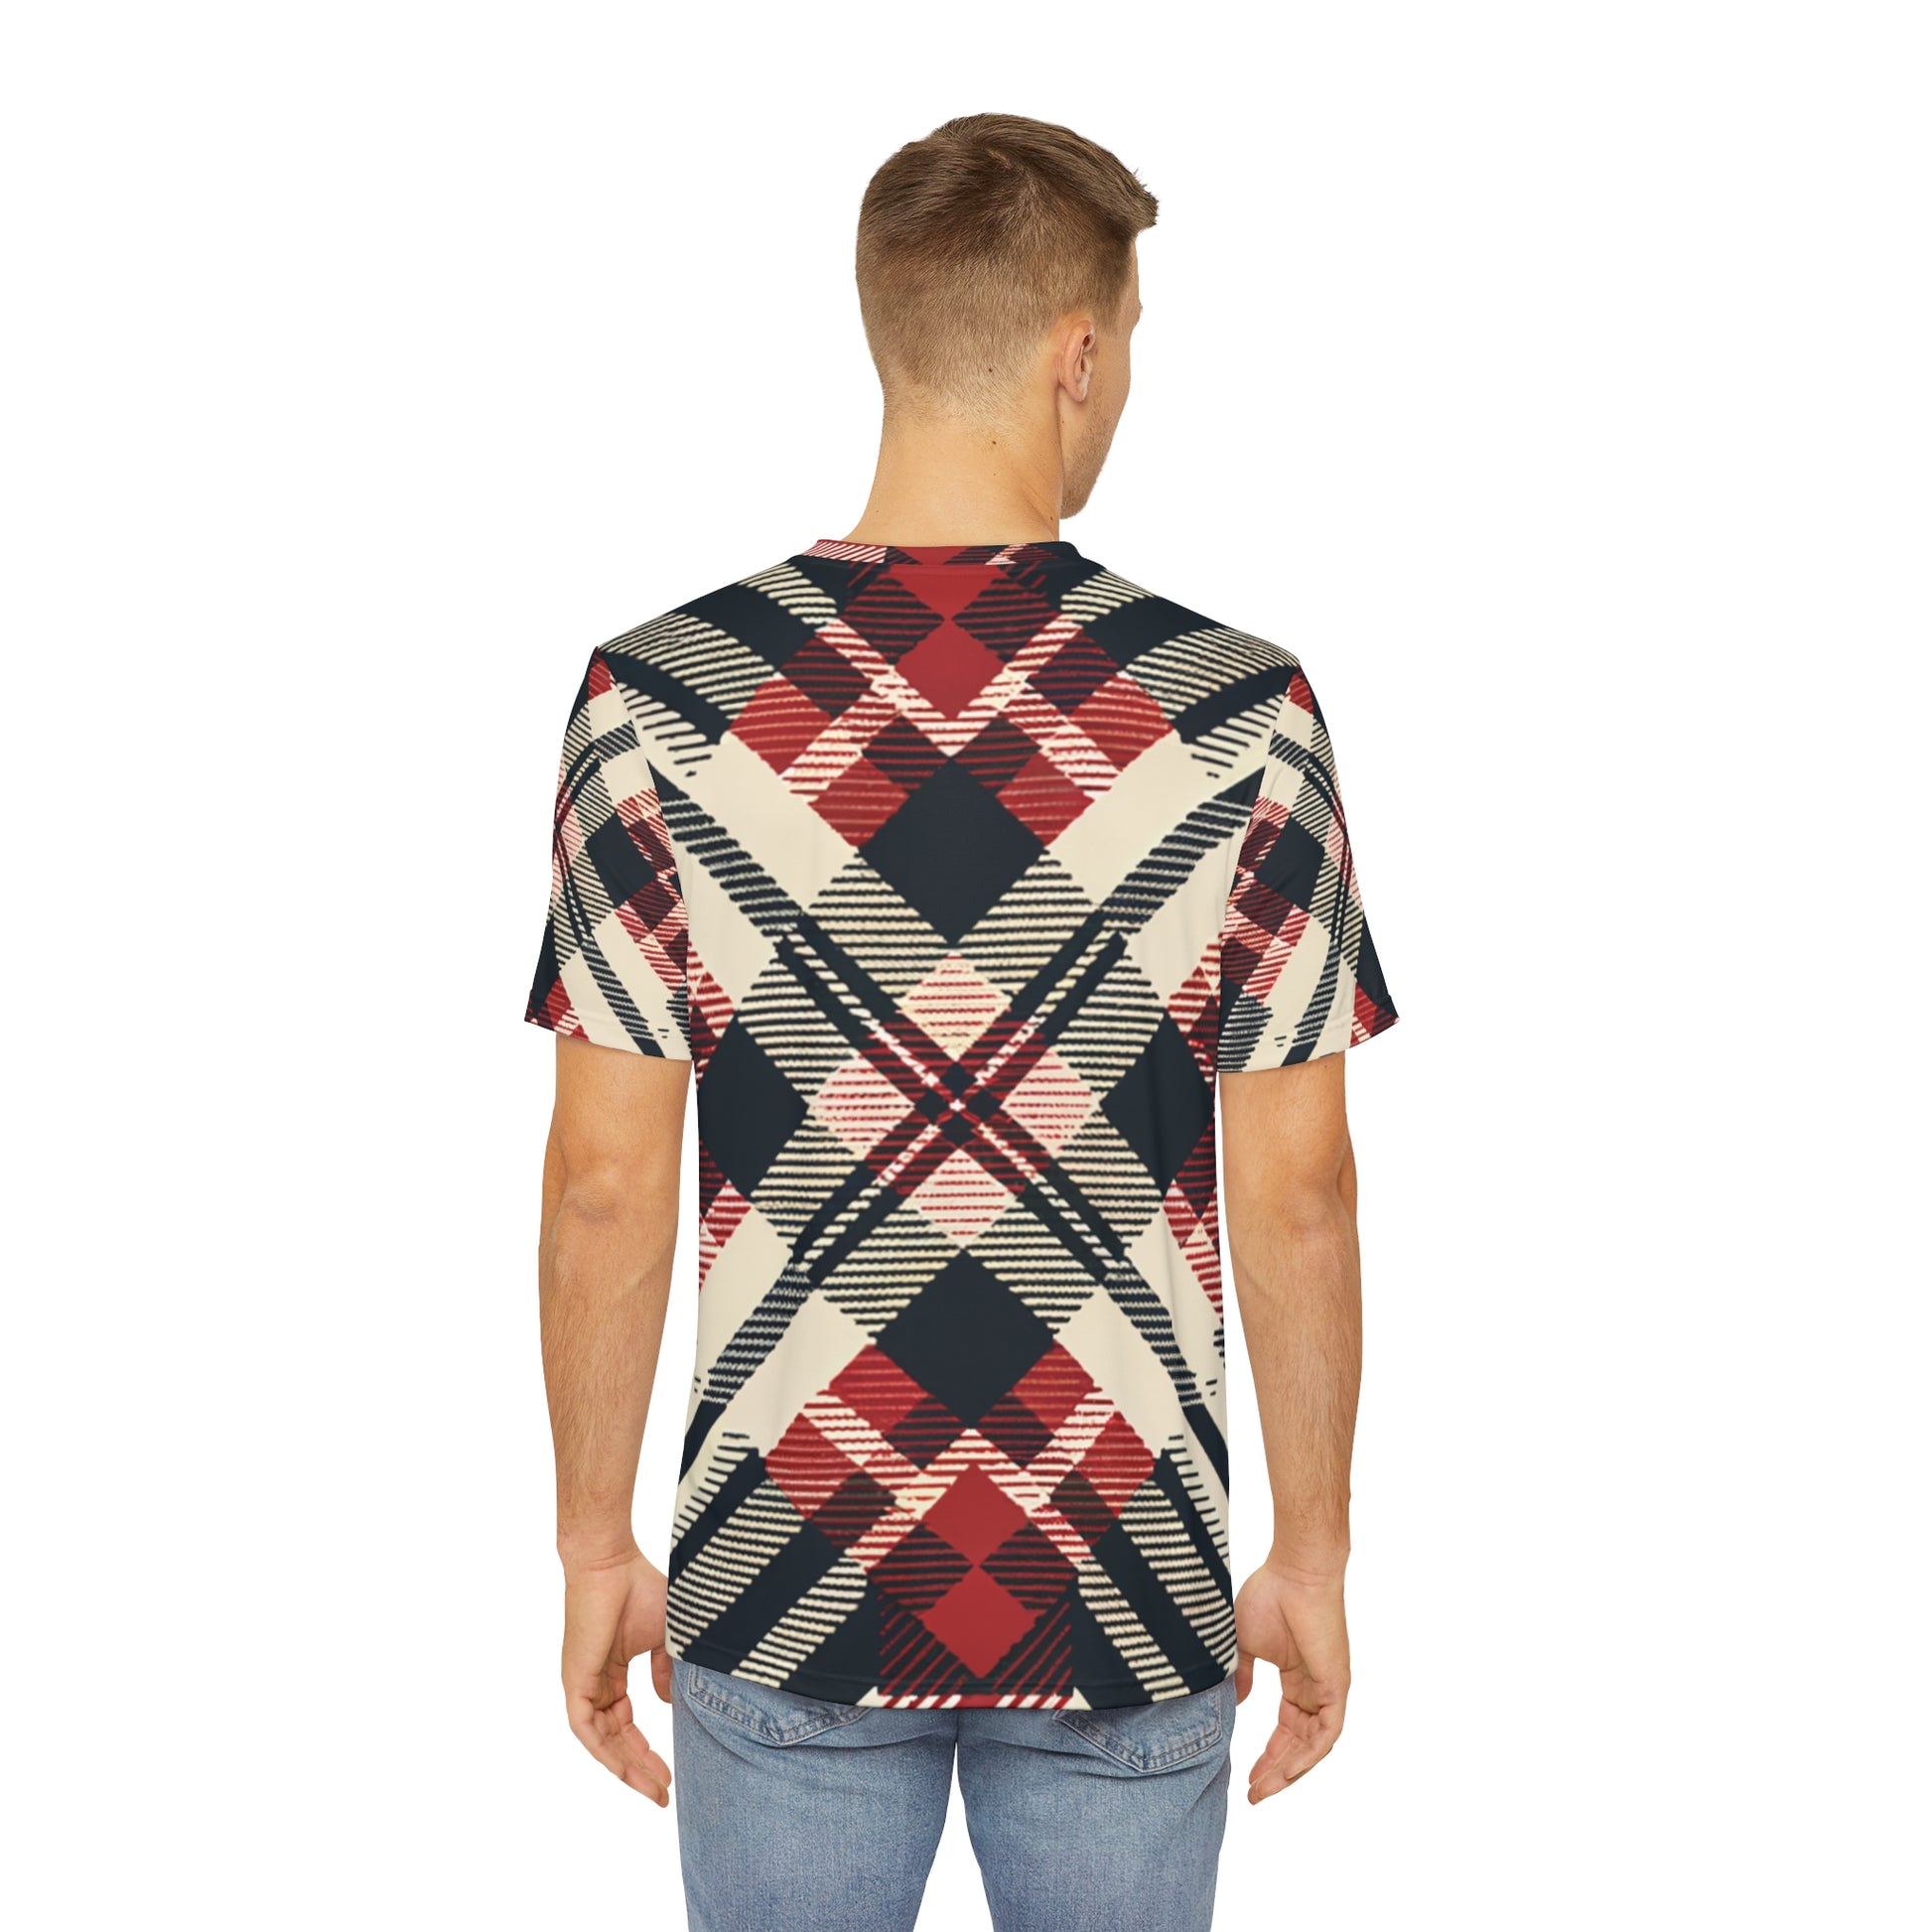 Back view of the Crimson Crosshatch Elegance Crewneck Pullover All-Over Print Short-Sleeved Shirt red black beige plaid print paired with casual denim pants worn by white man